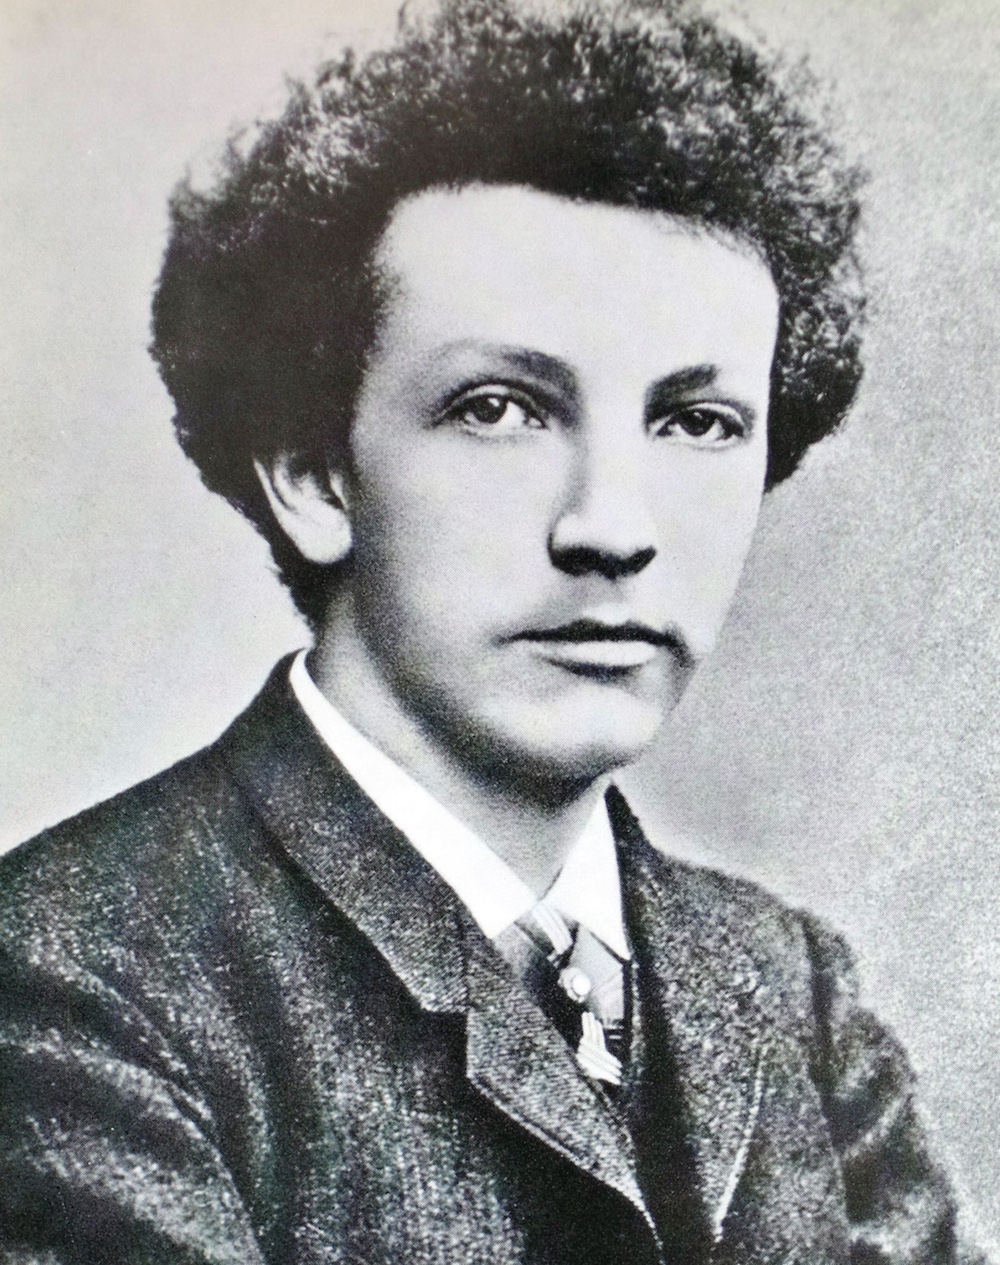 Richard Strauss as a young man